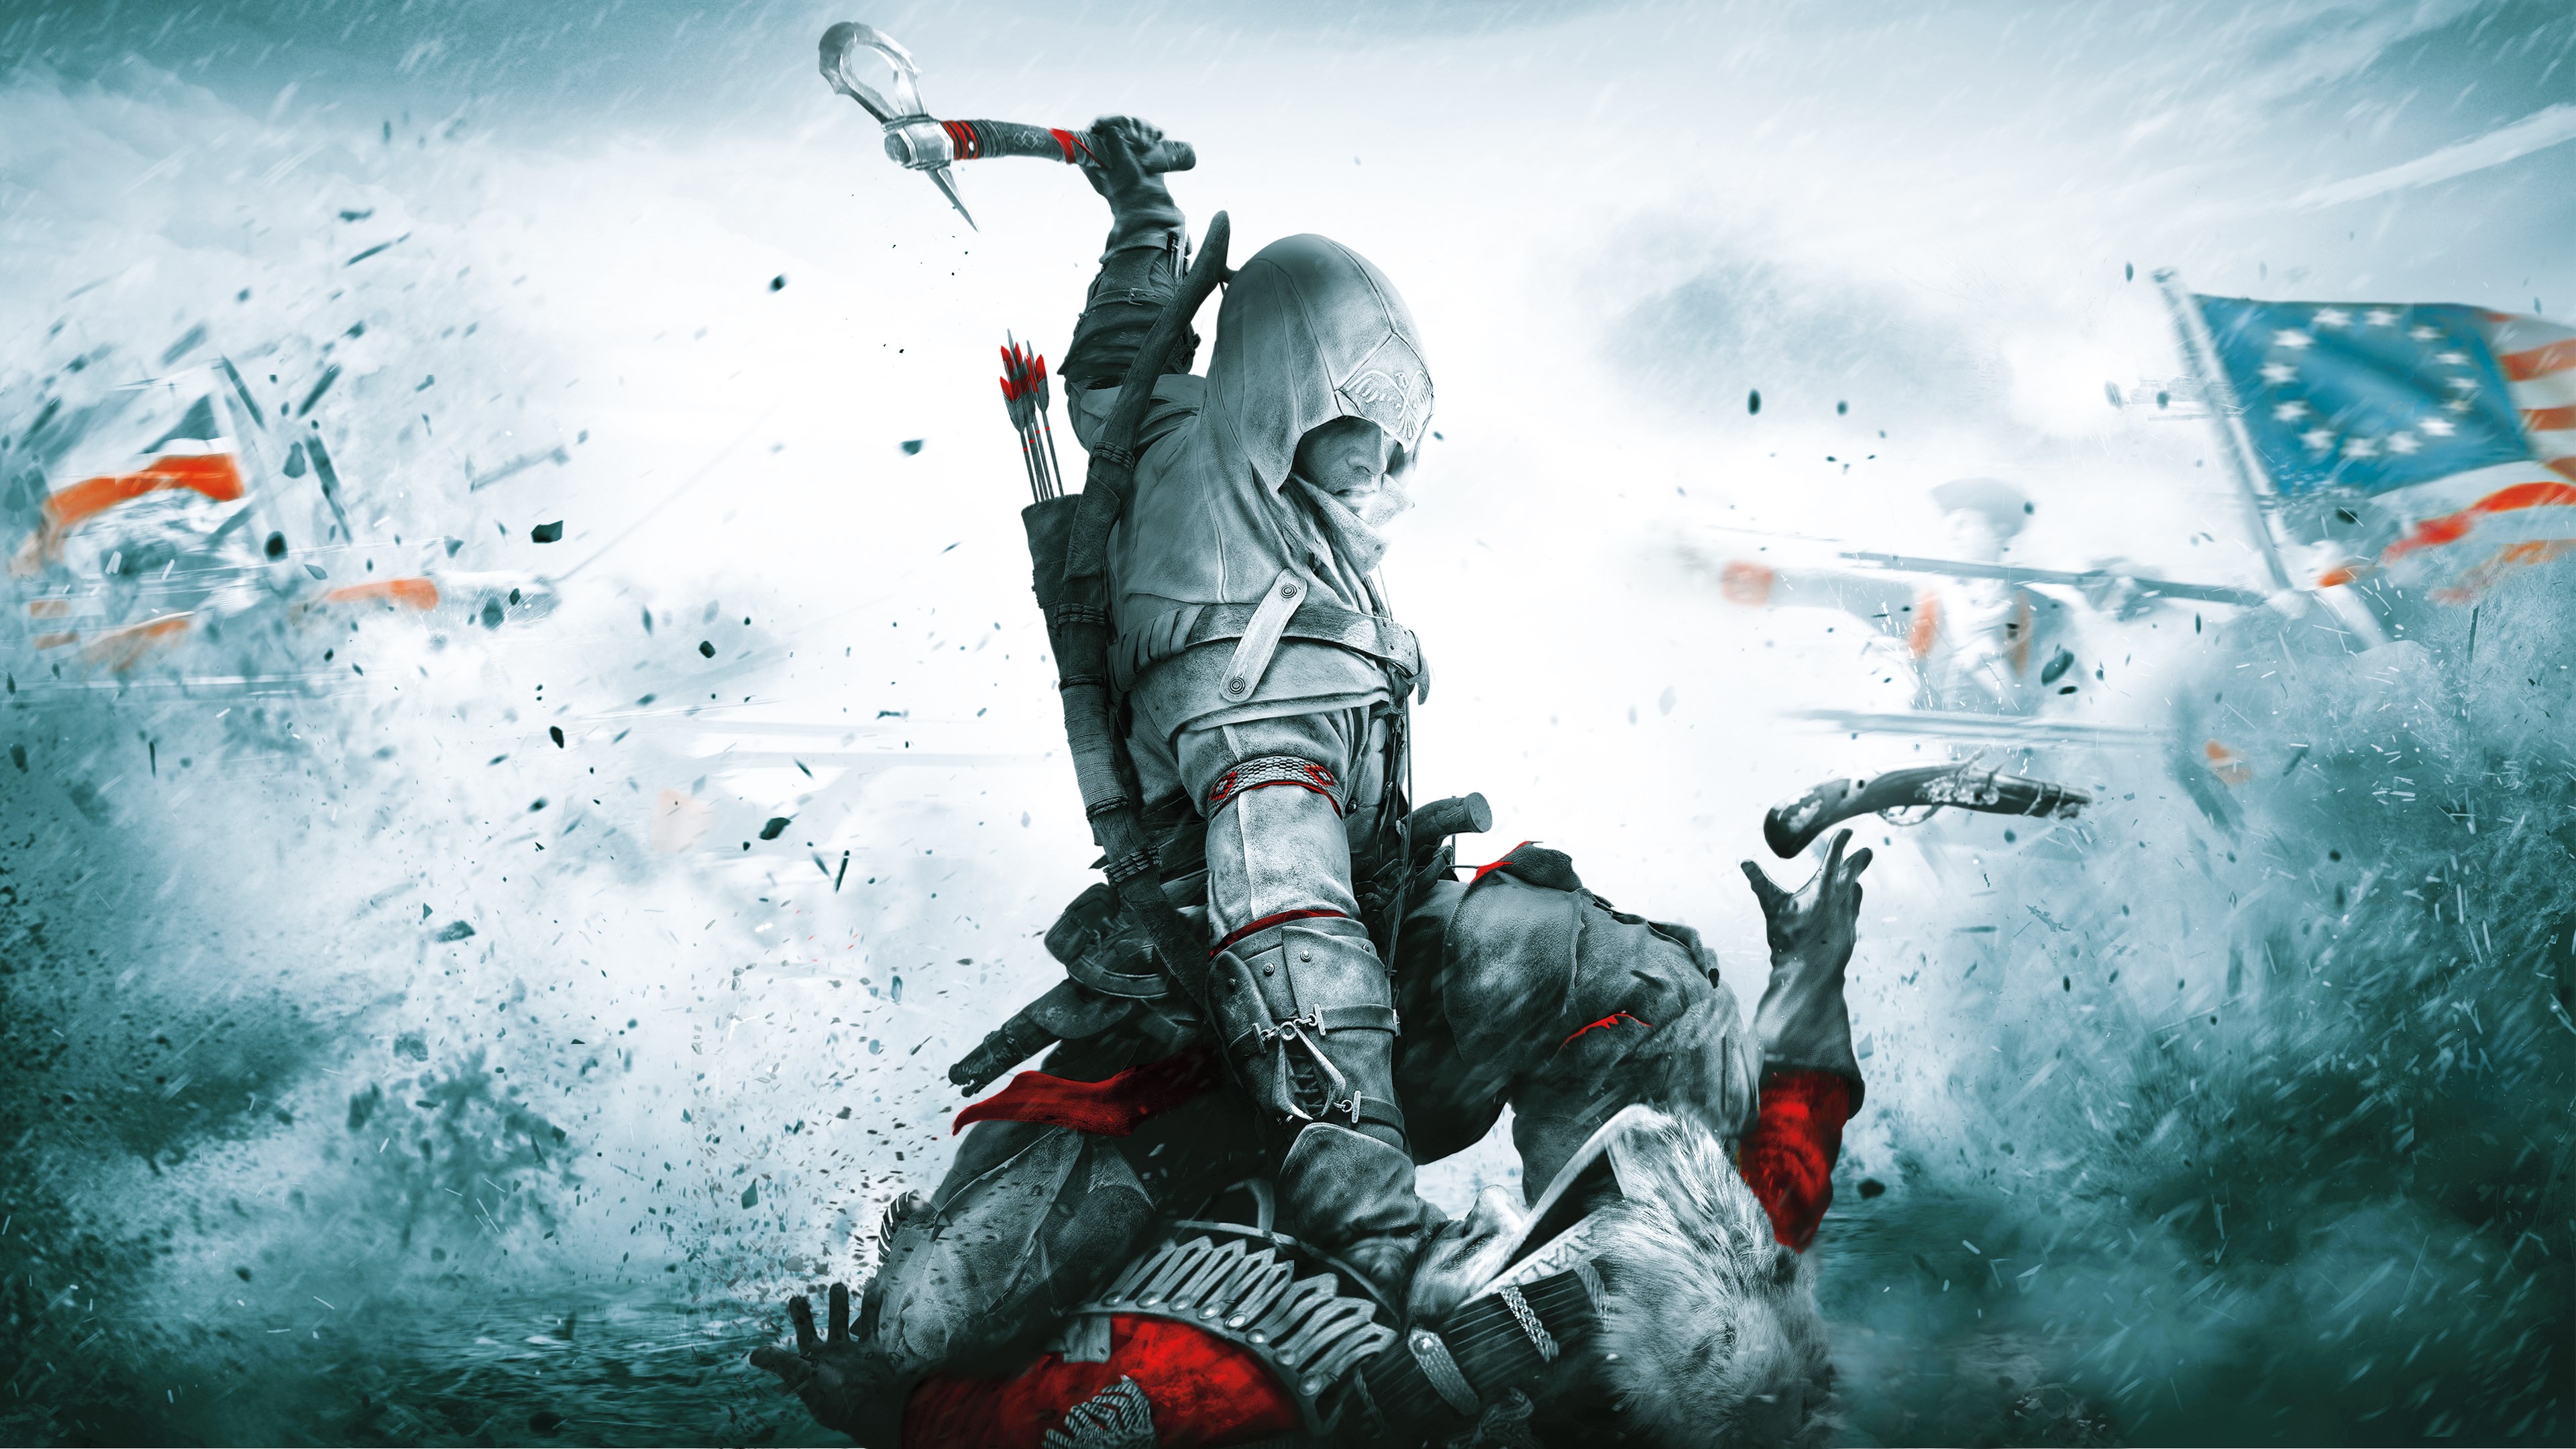 assassins creed 3 remastered xbox store